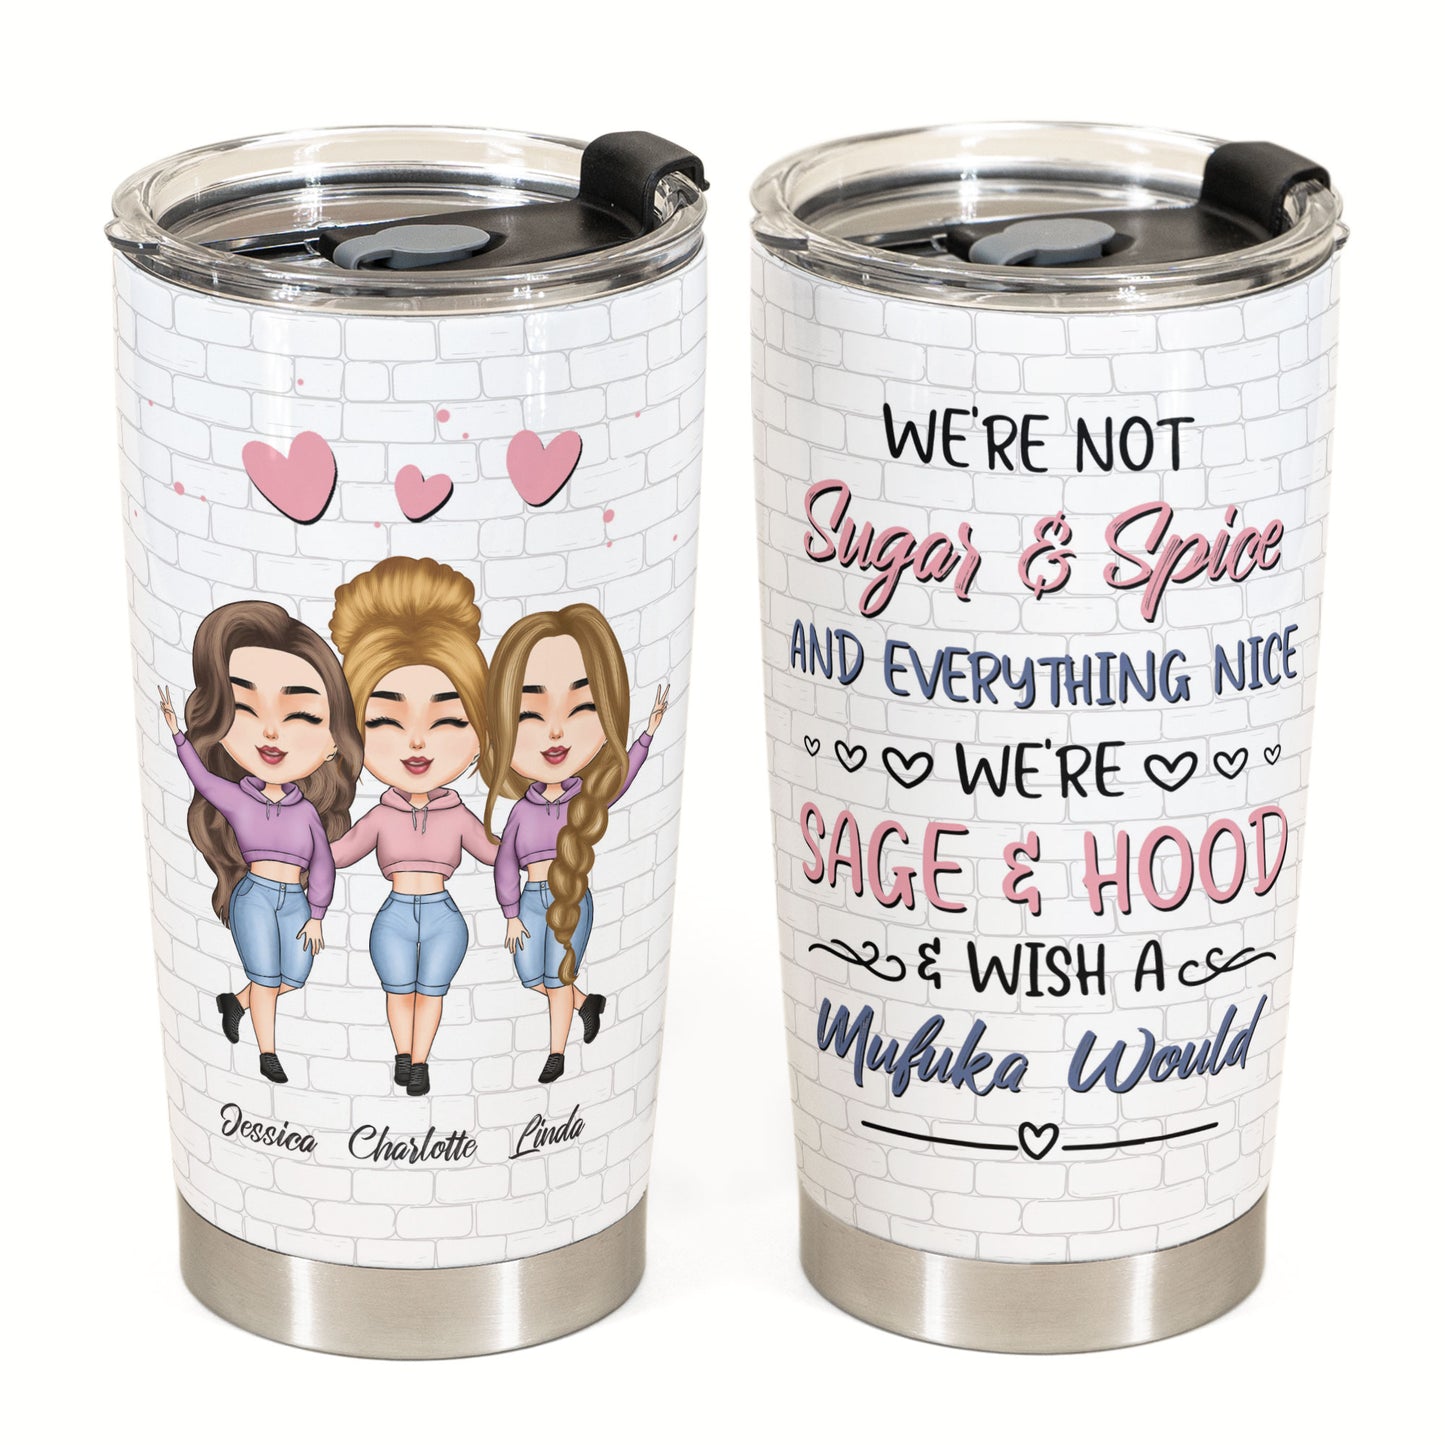 Not Sugar And Spice We're Sage & Hood - Personalized Tumbler Cup - Funny Birthday Gift For Besties, Sisters, BFF